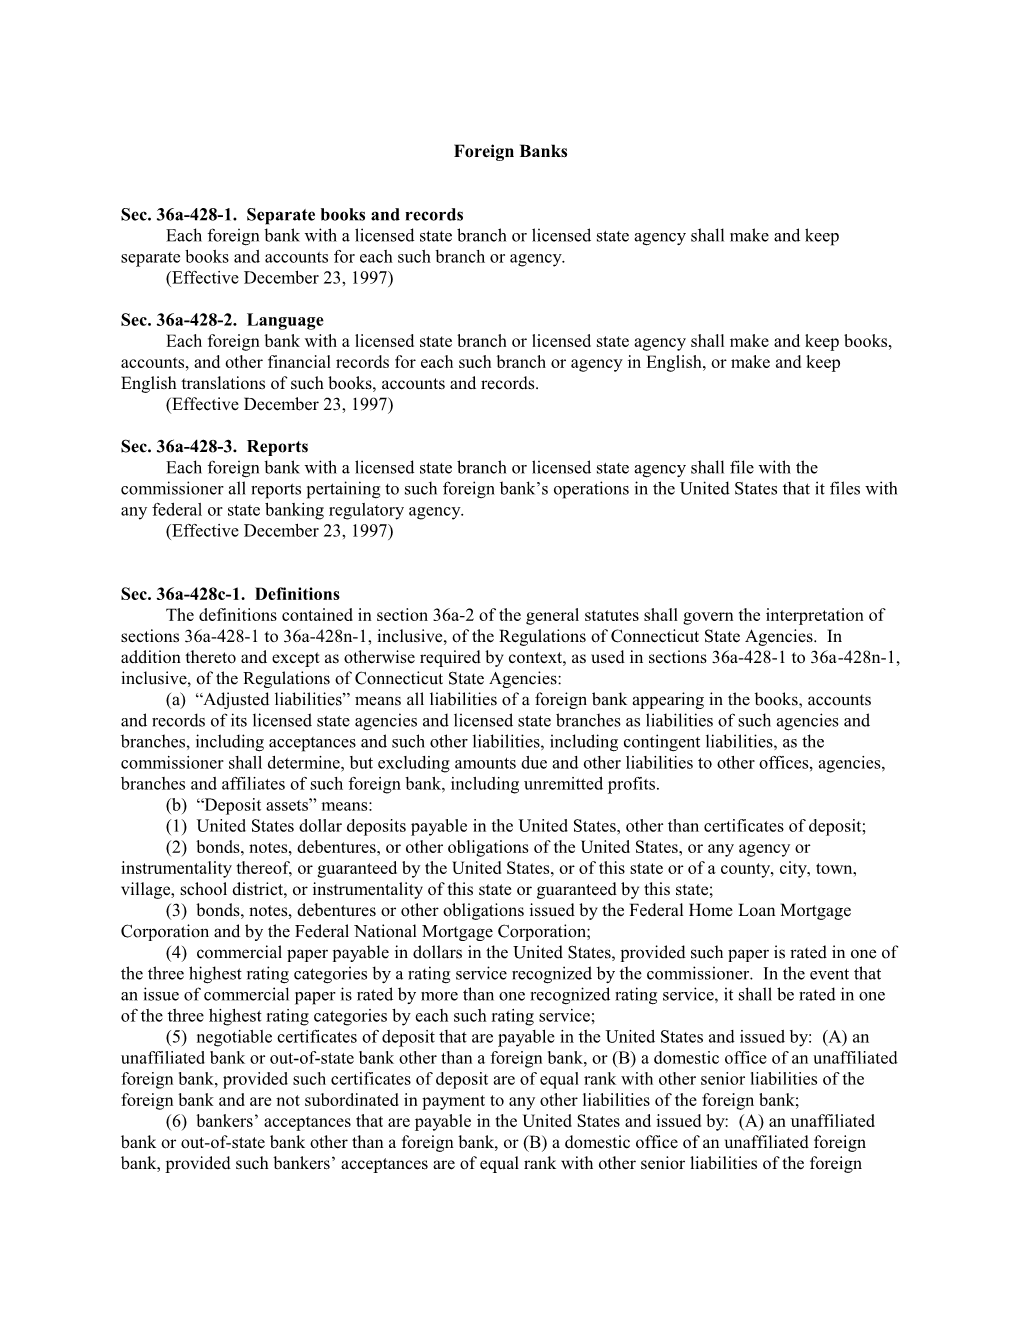 Regulations of Connecticut State Agencies s1